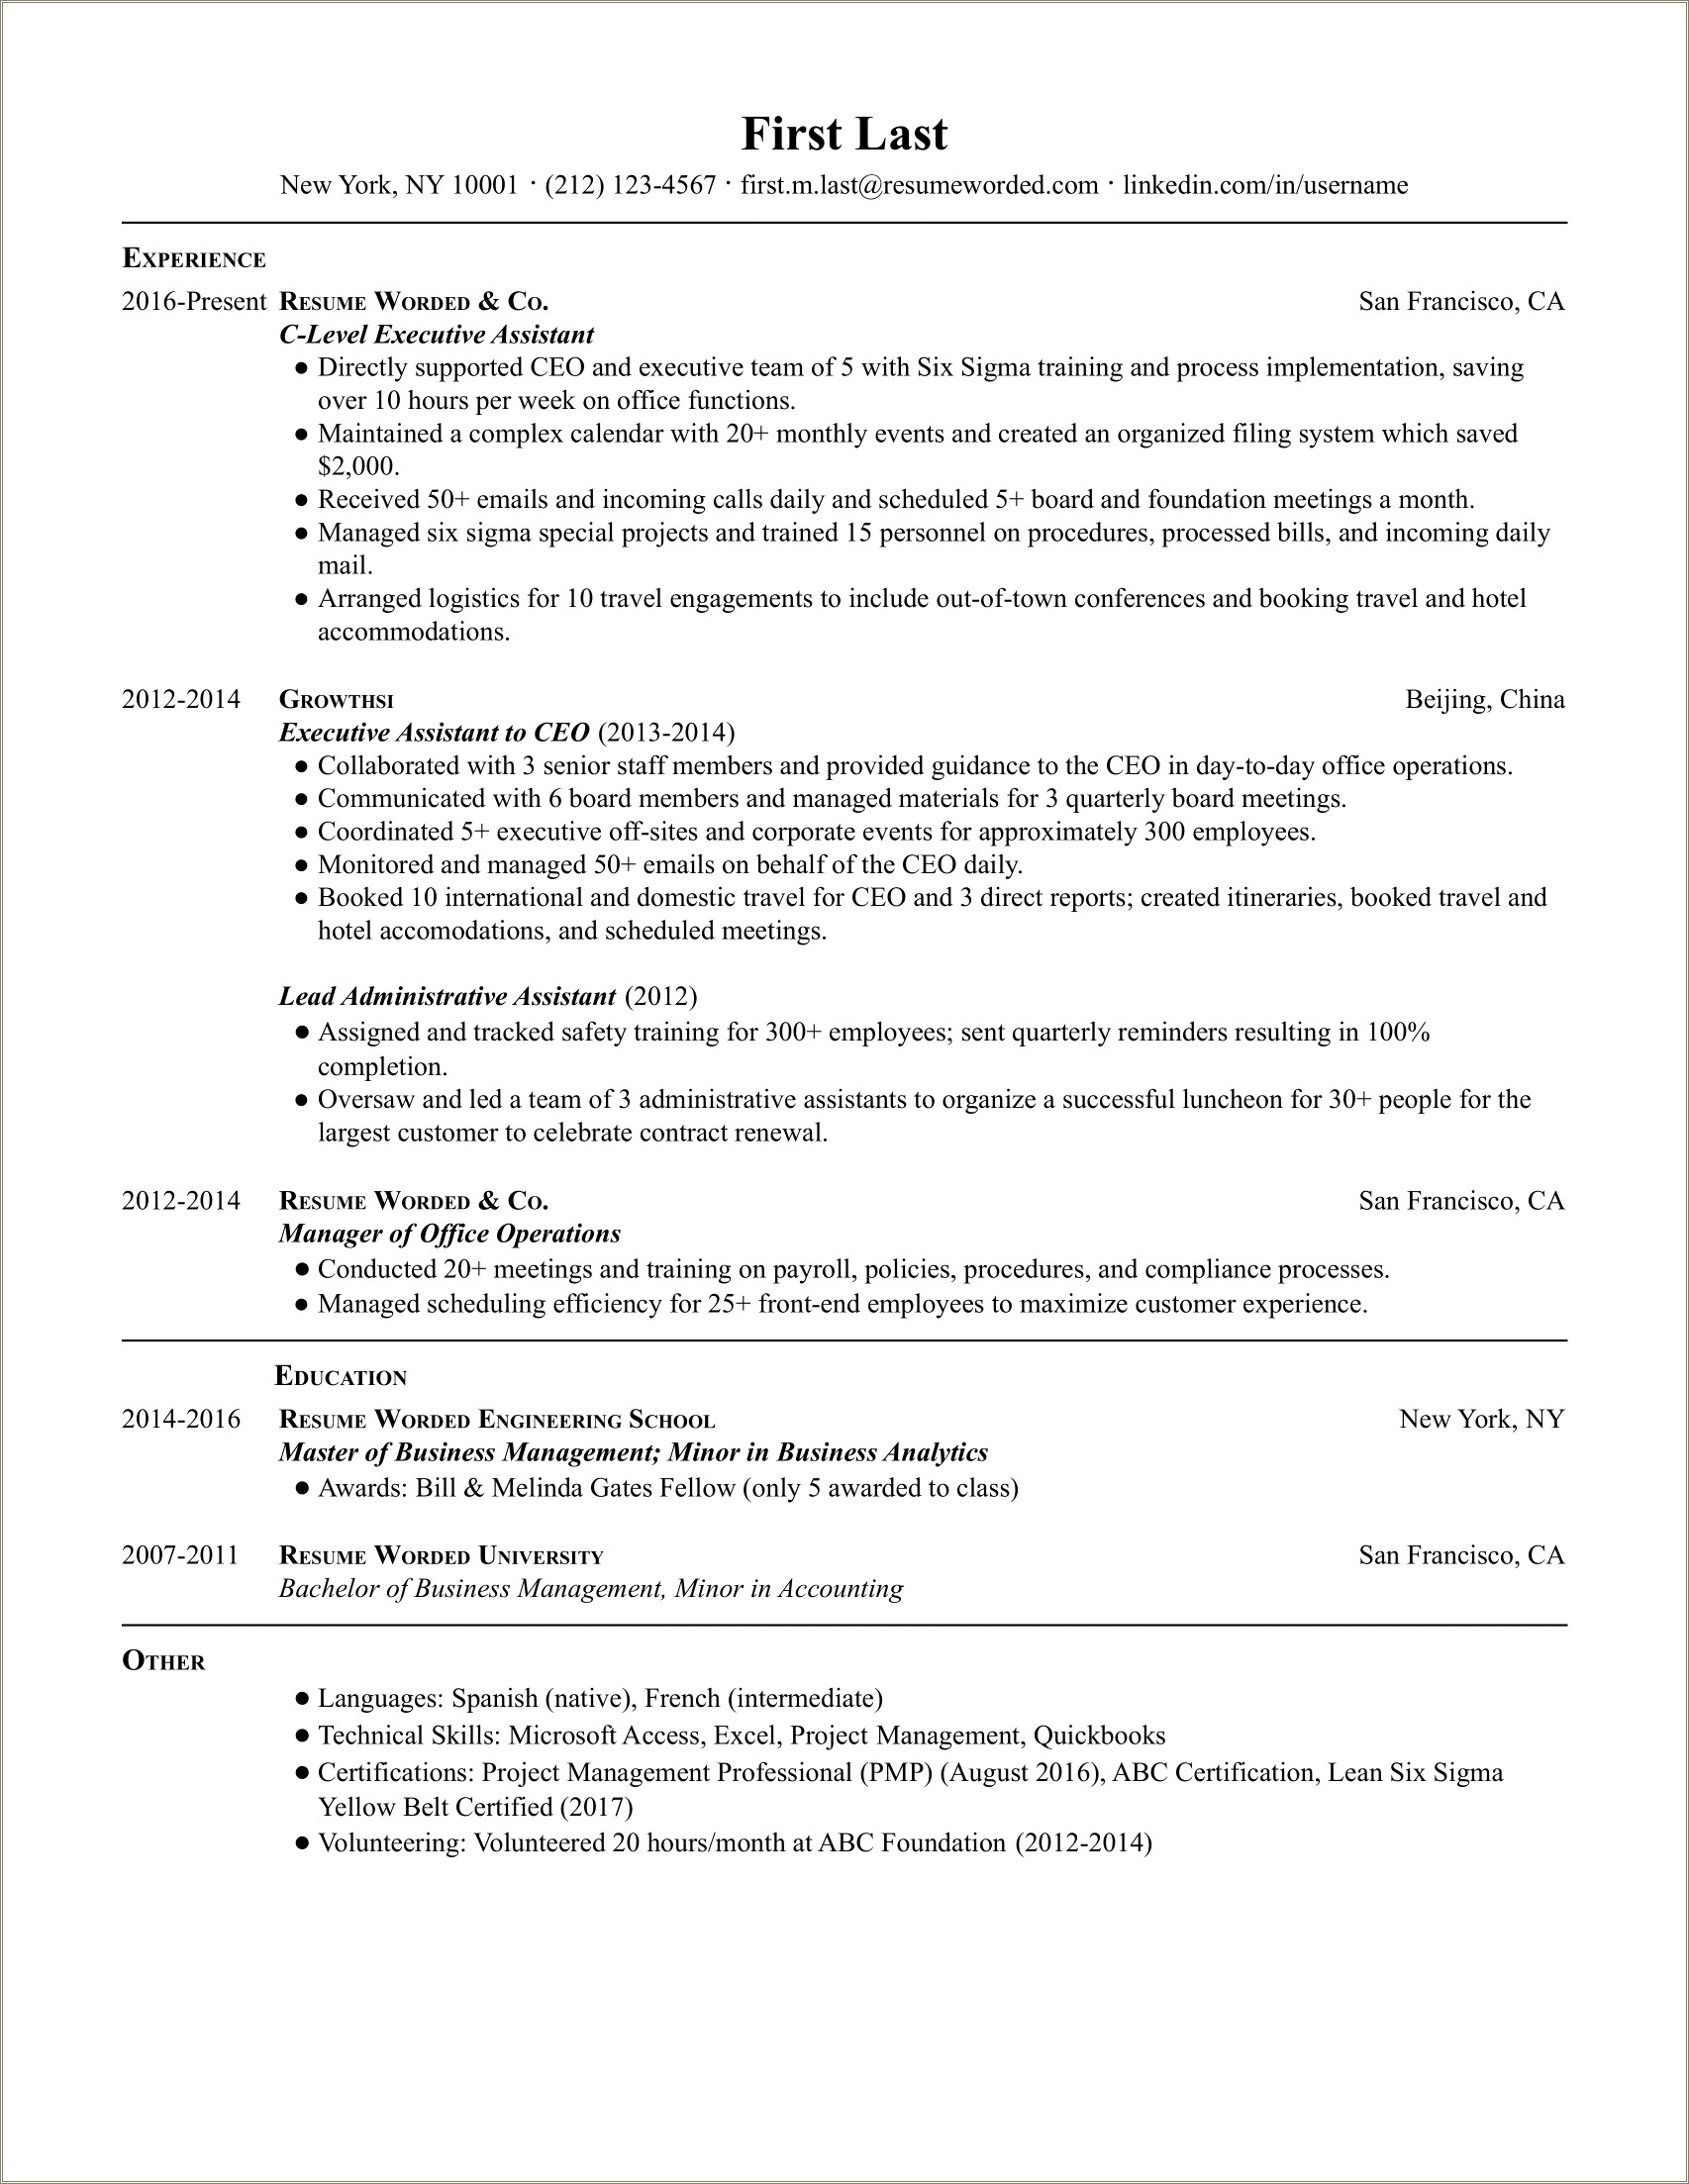 Executive Assistant Job Summary For Resume